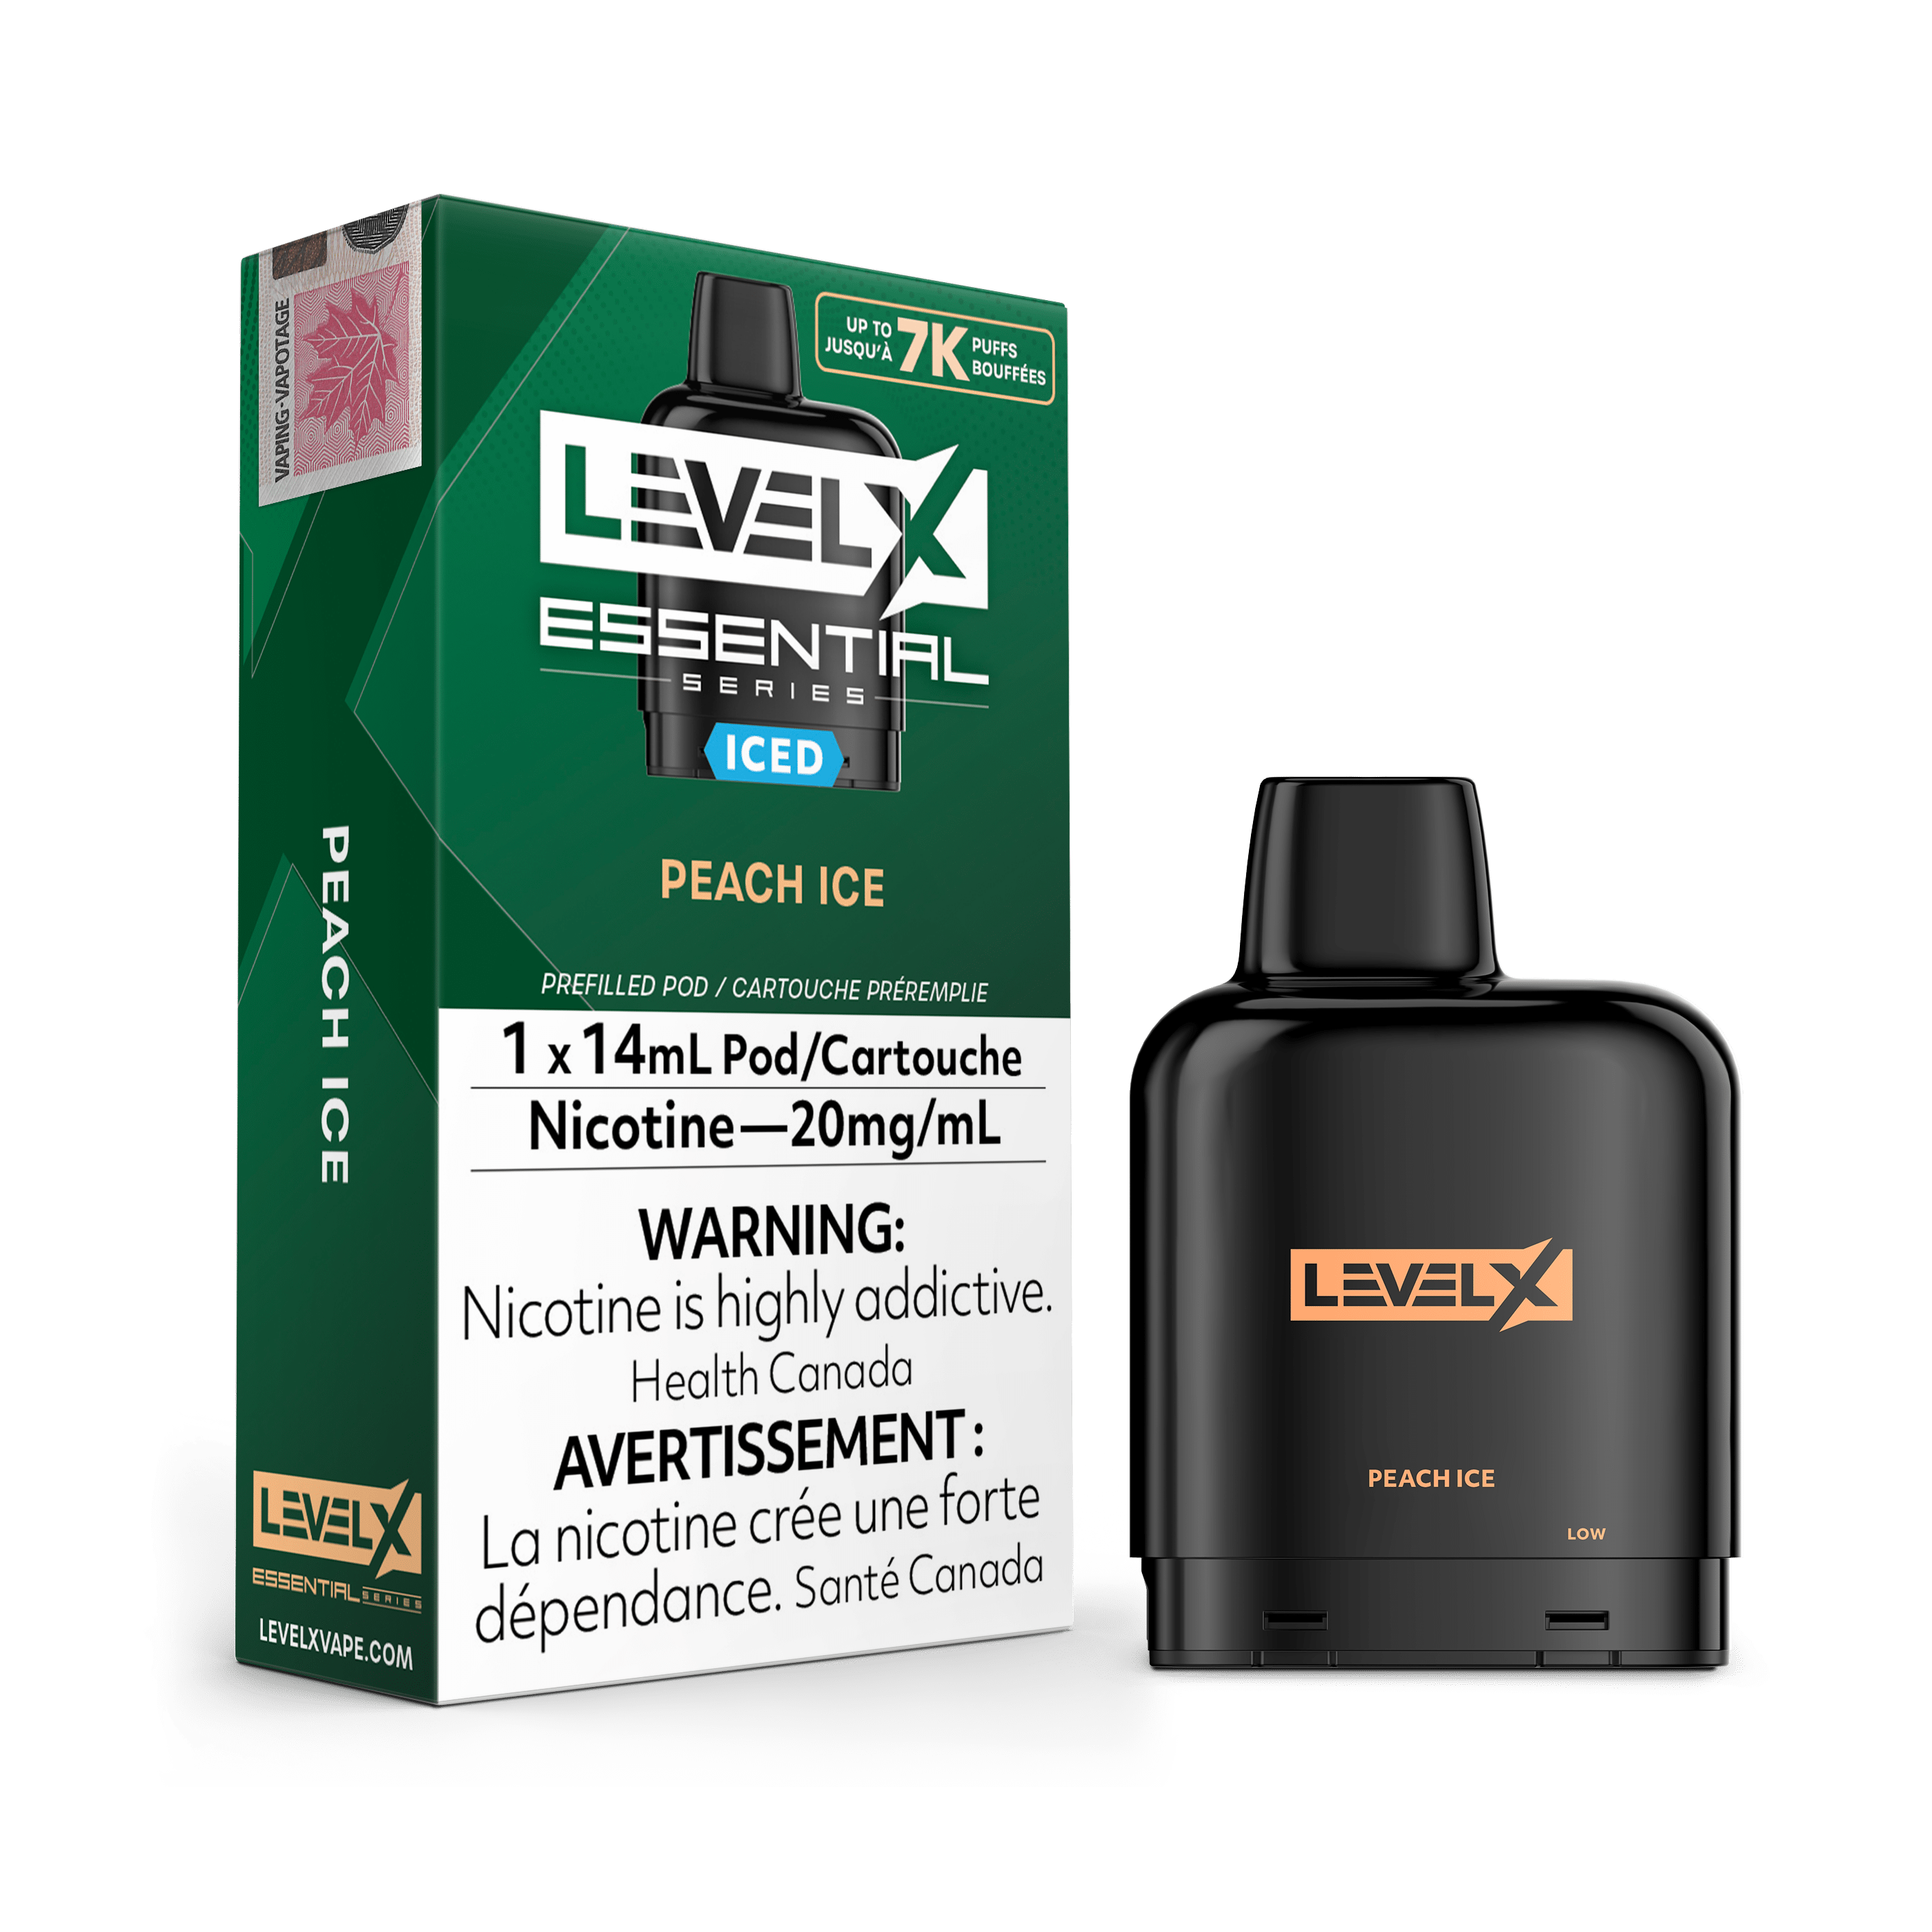 Level X Essential Series Pod - Peach Ice available on Canada online vape shop